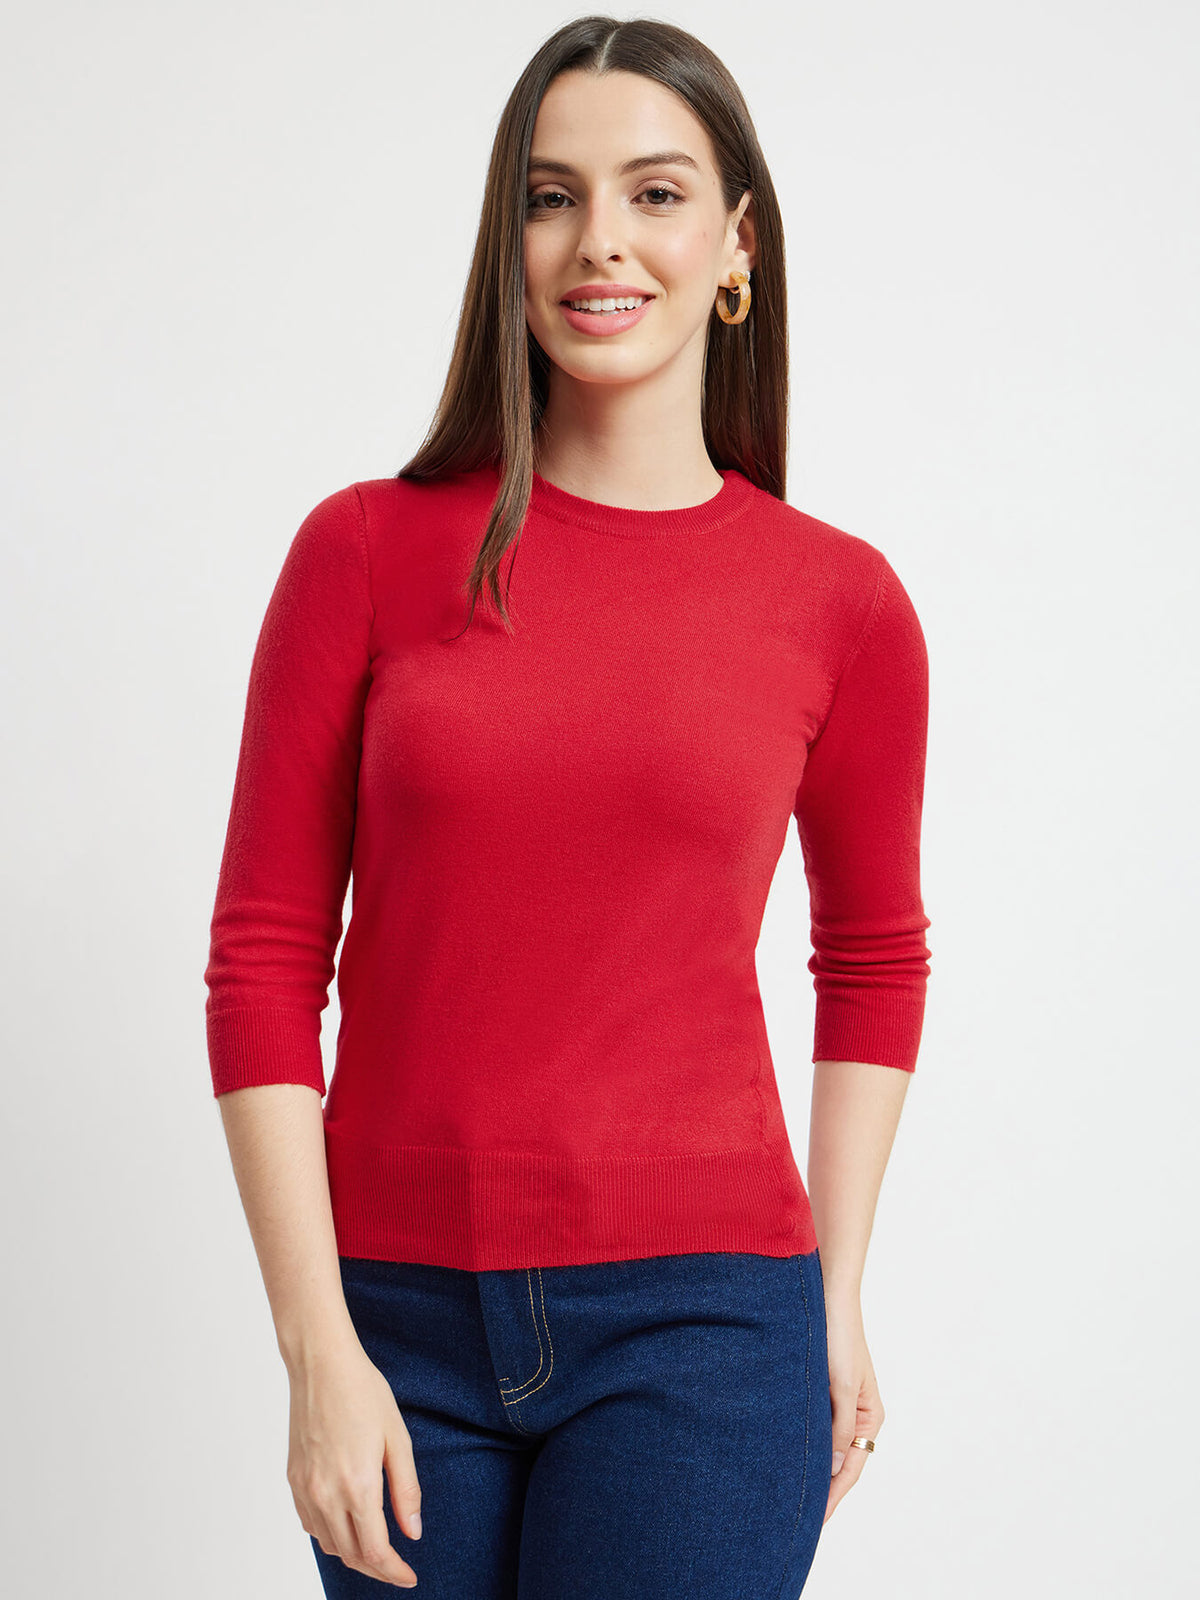 LivSoft Round Neck Knitted Top - Red